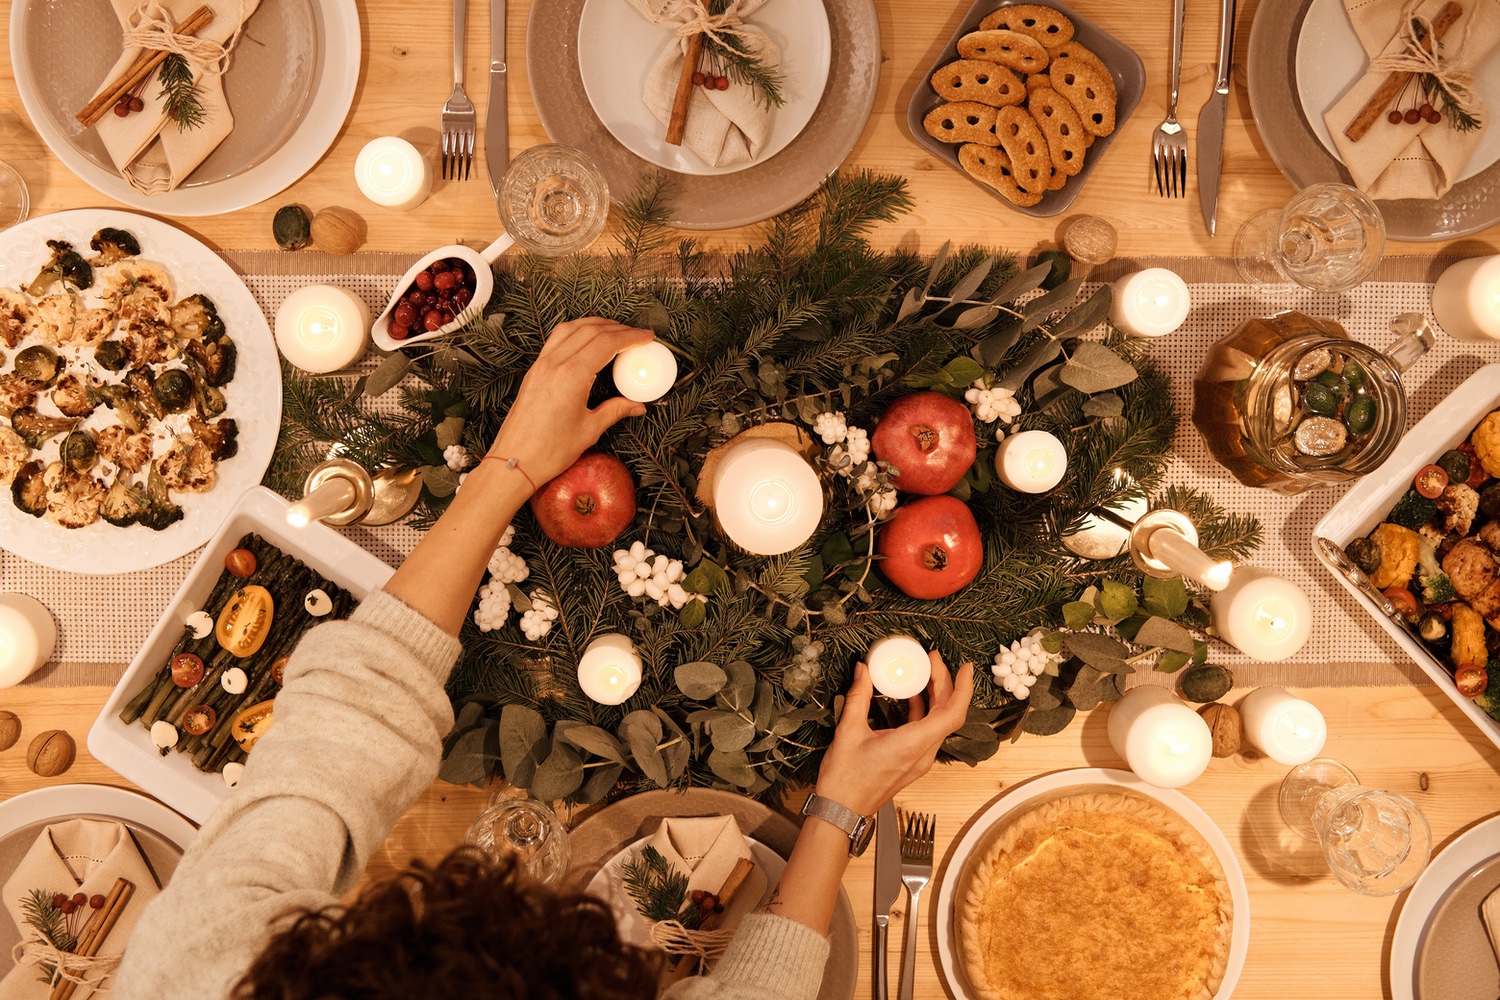 Do you know which foods avoid this Christmas if you have diabetes?